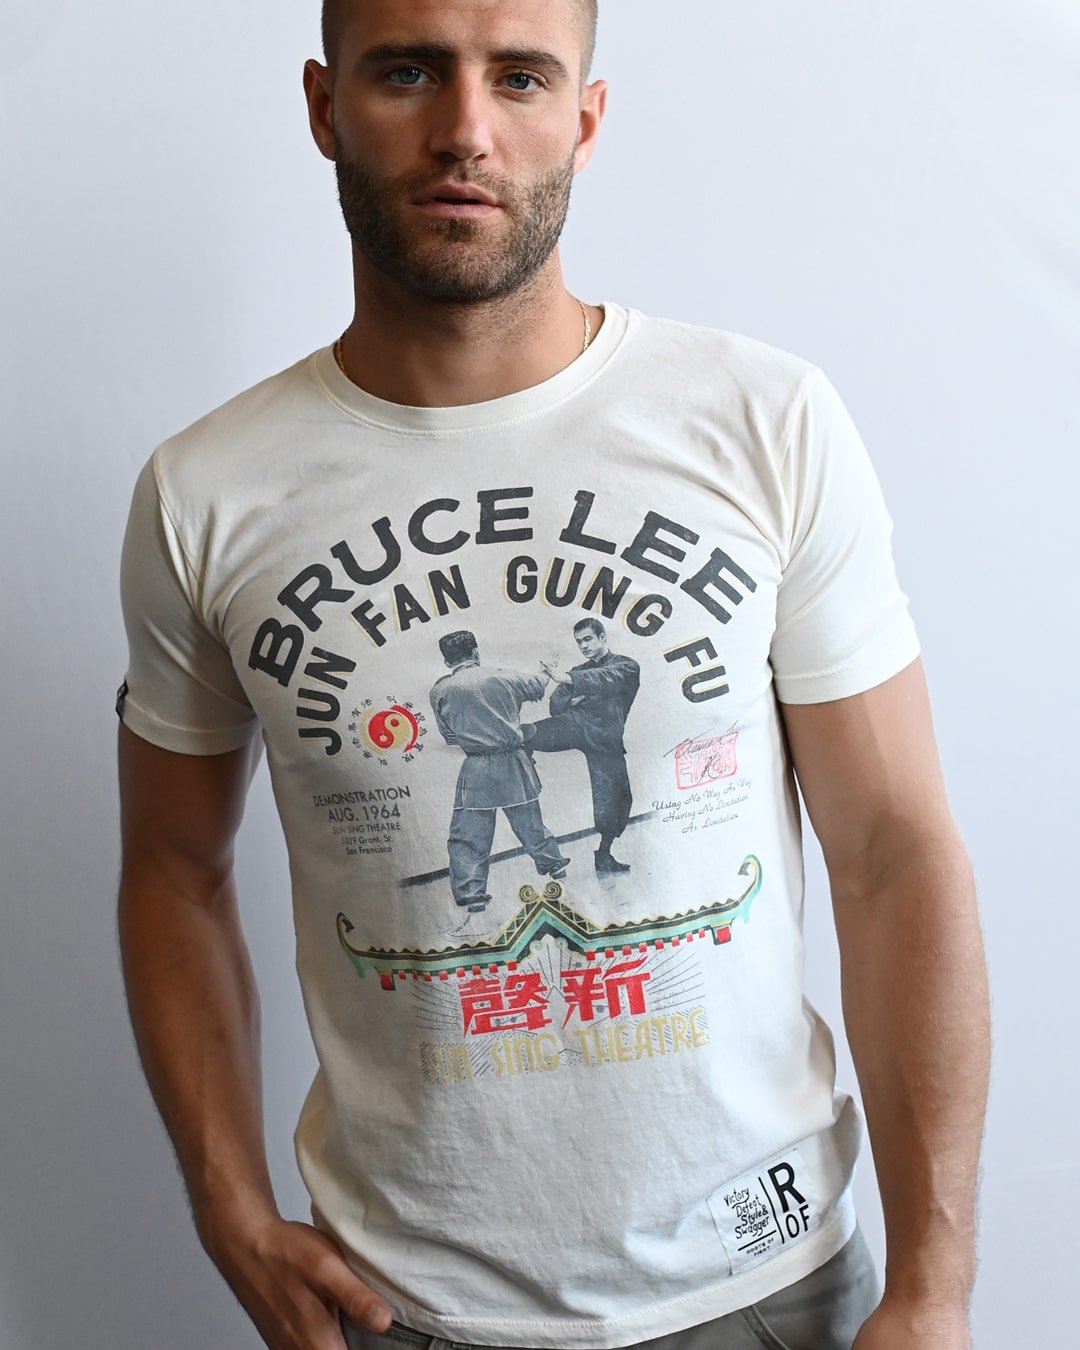 Bruce Lee Demo Vintage White Tee - Roots of Fight